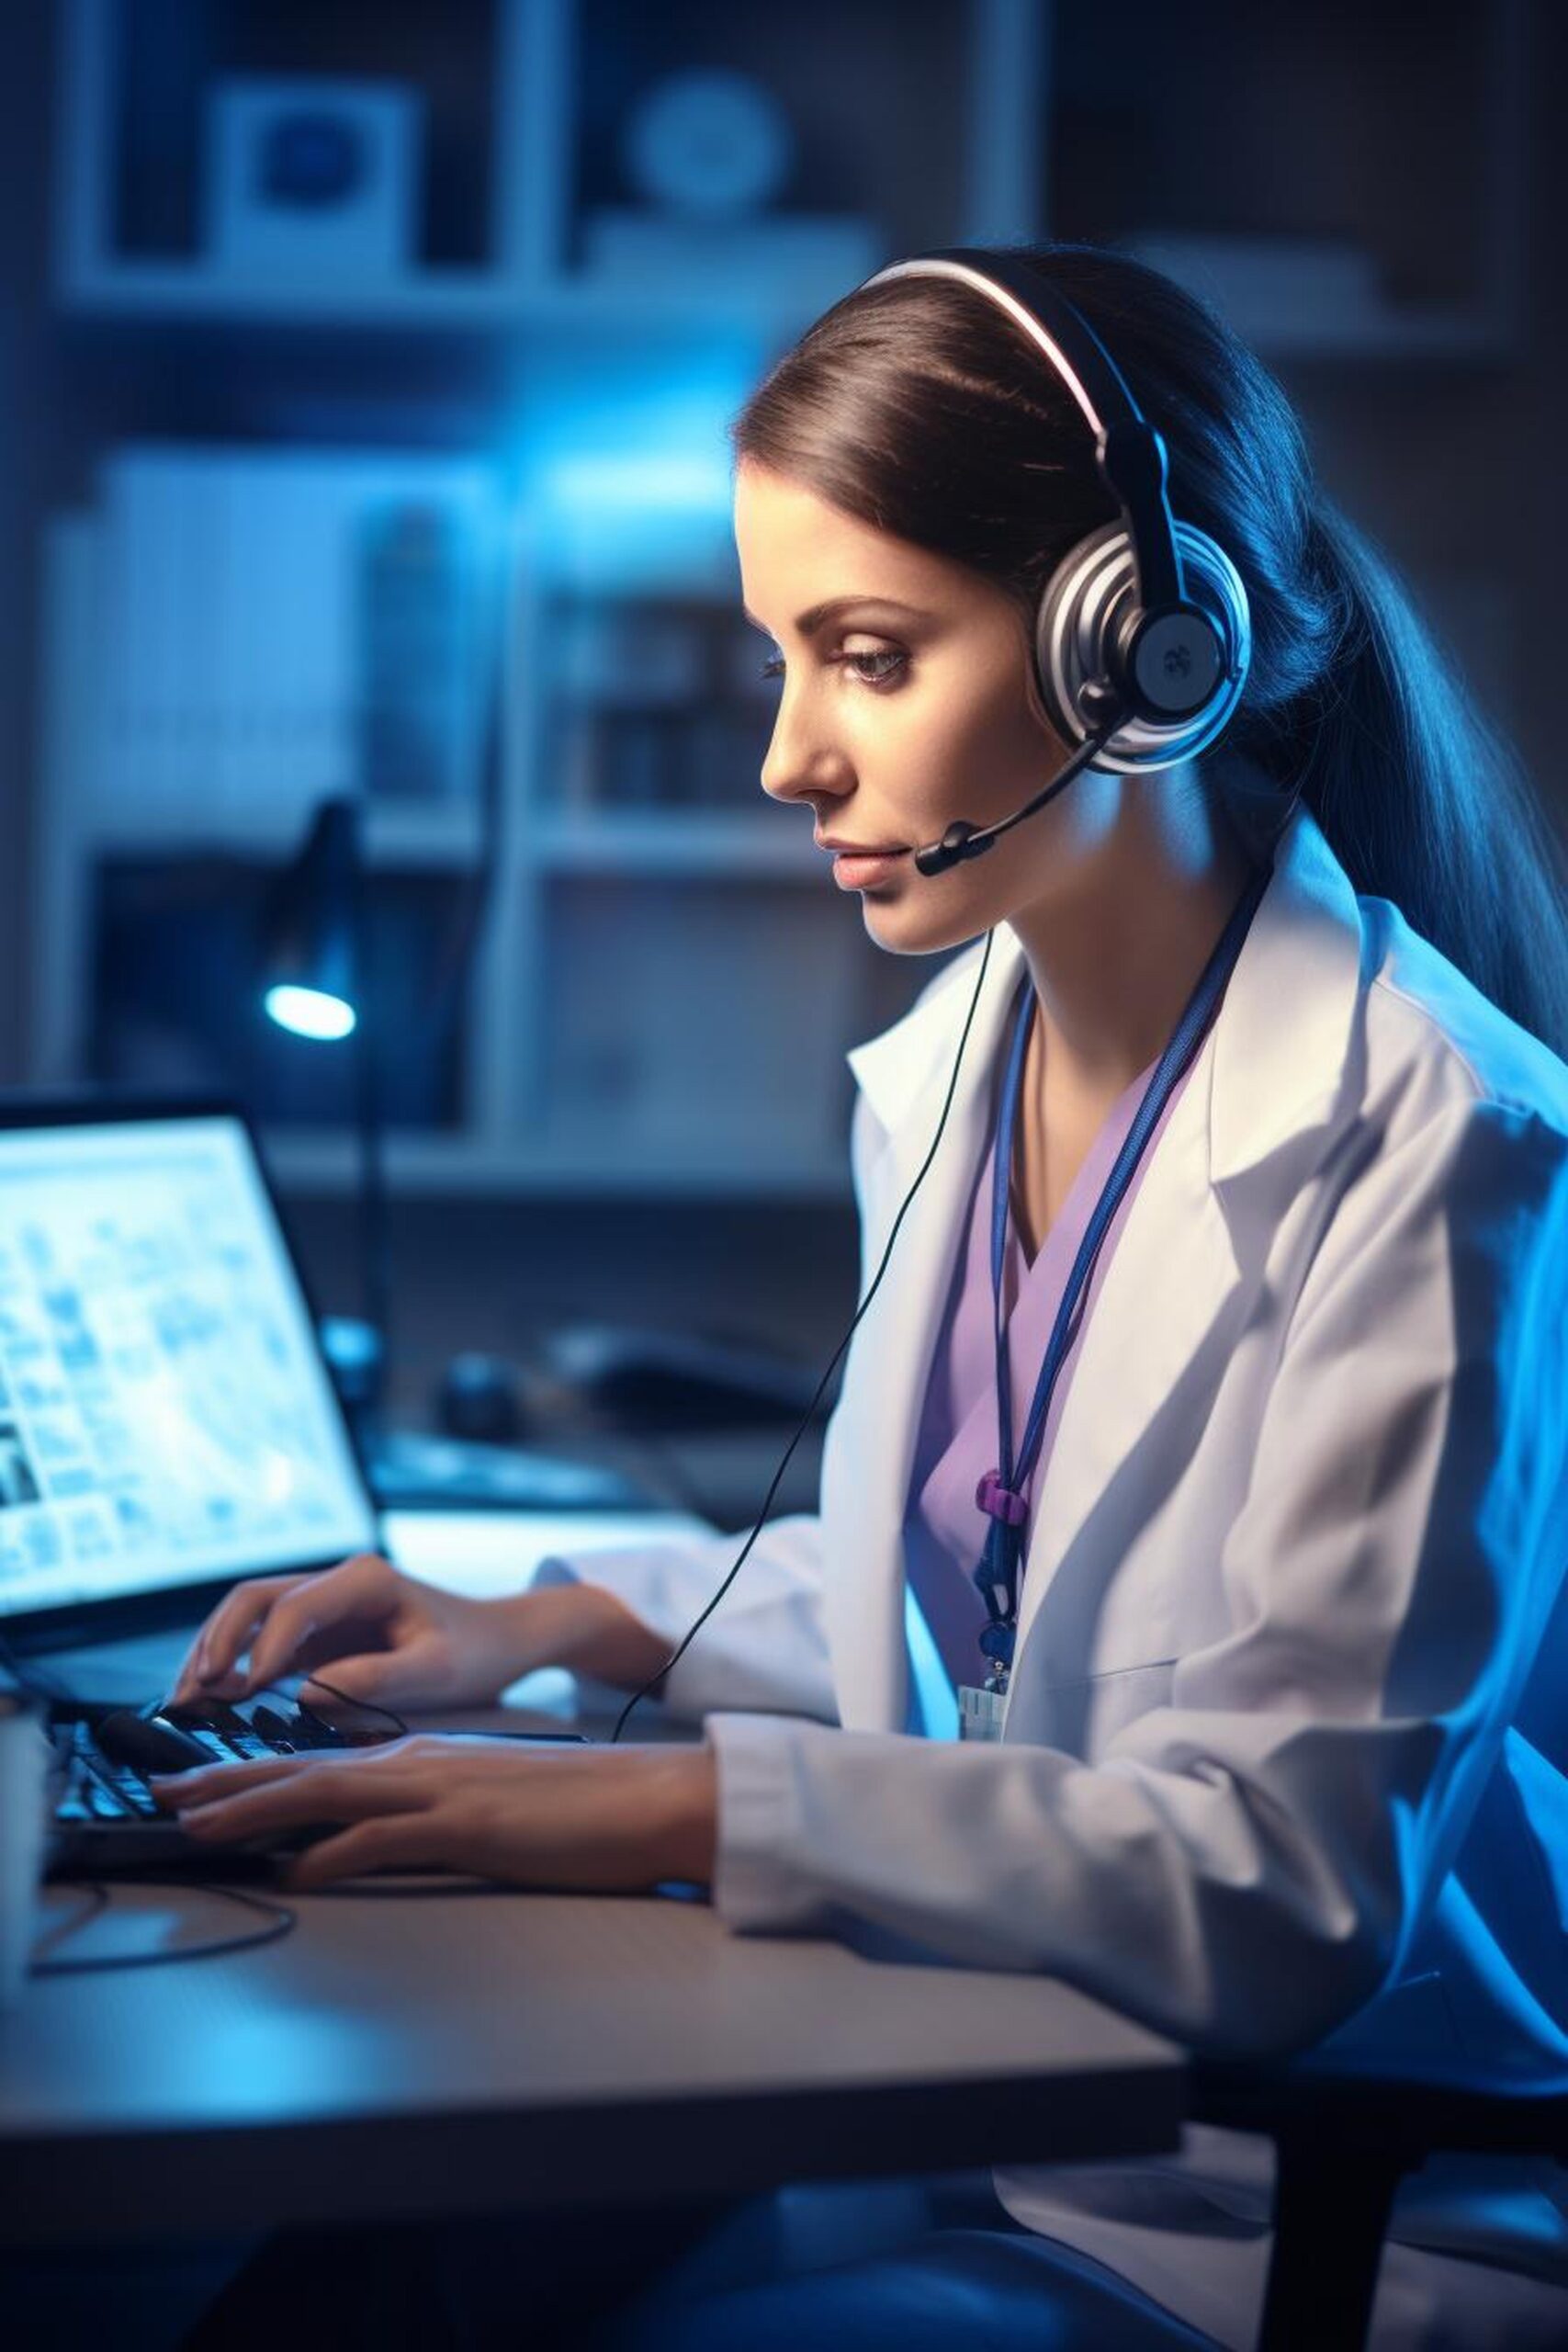 Doctor on a telecall representing contact us image